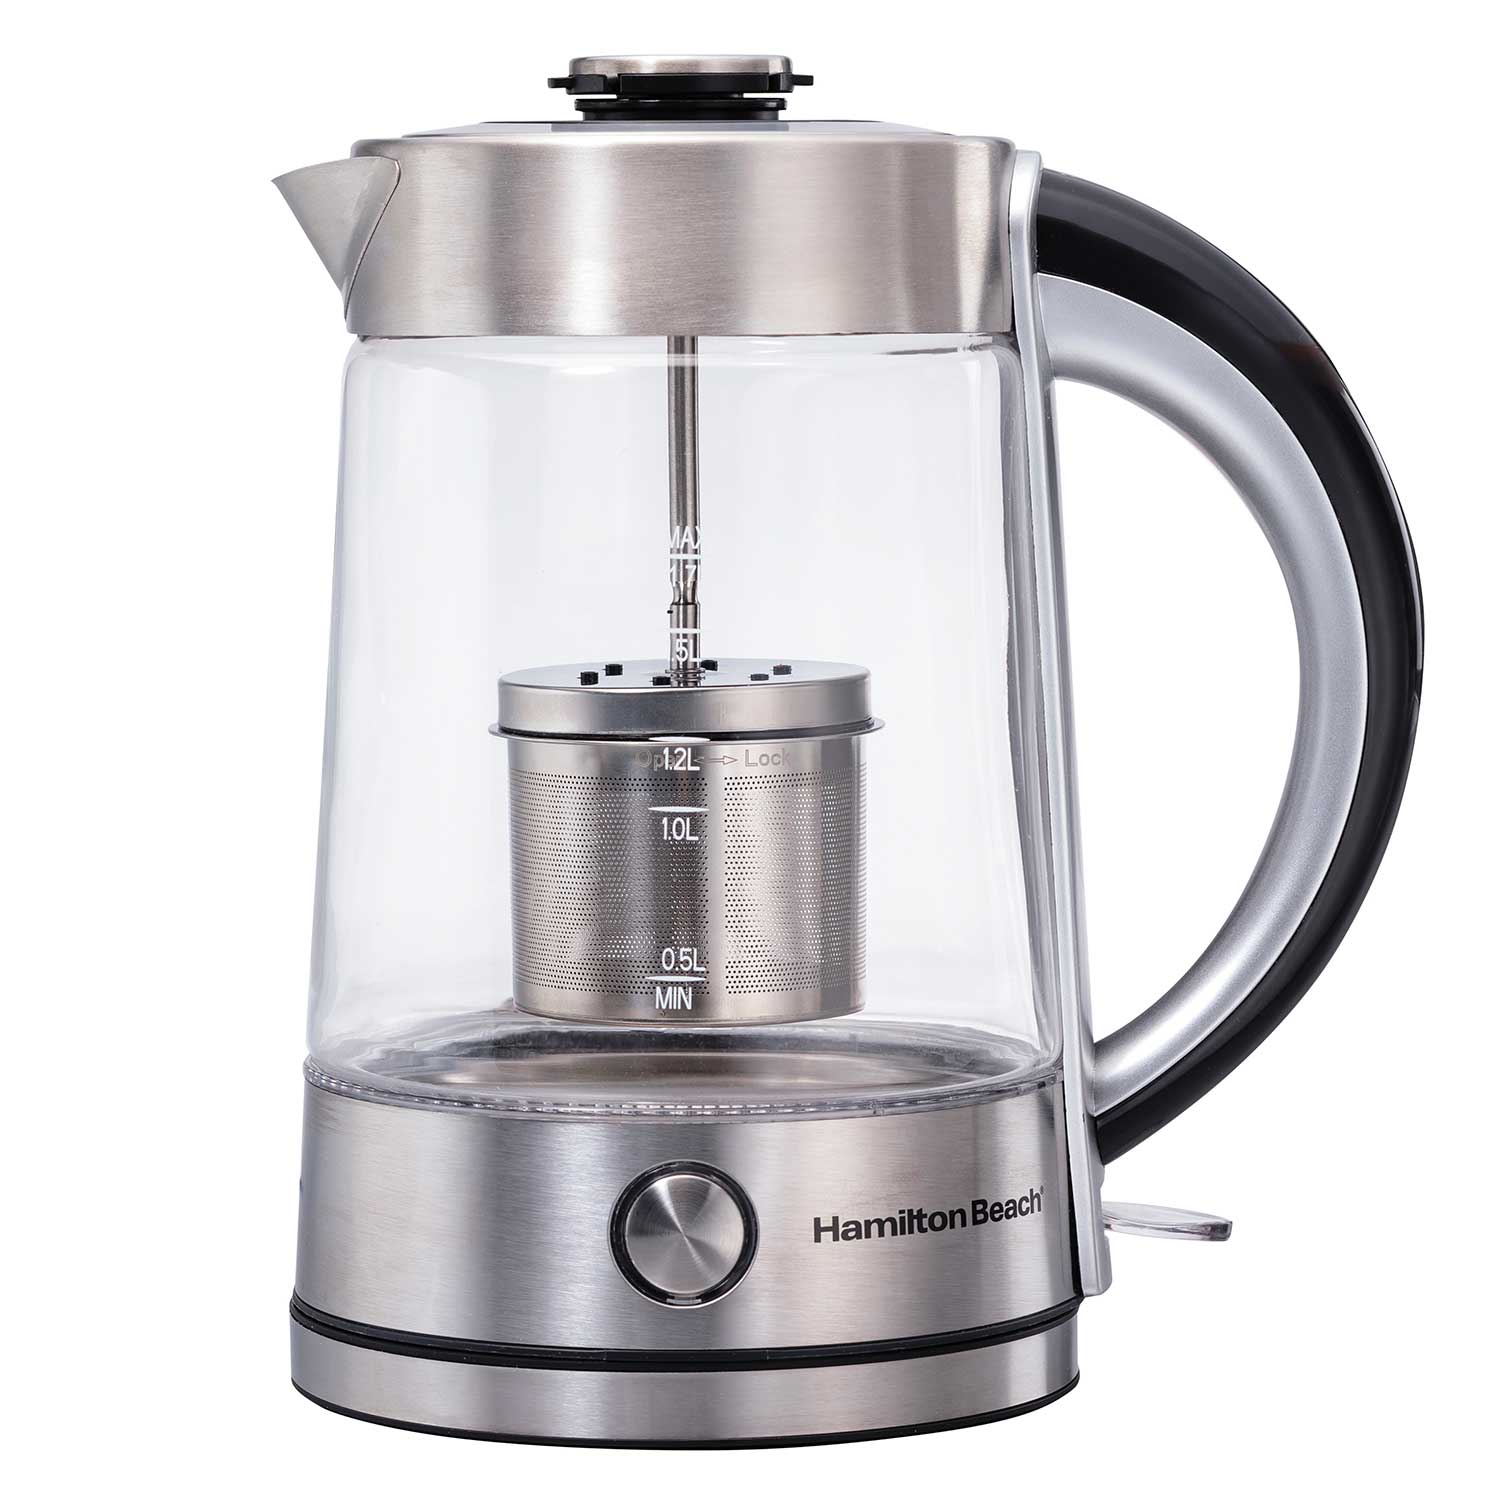 SEE your water boil with the BELLA 1.7 Liter Glass Kettle! This kettle is  super durable and uses German Schott glass to make sure your tea is in  the